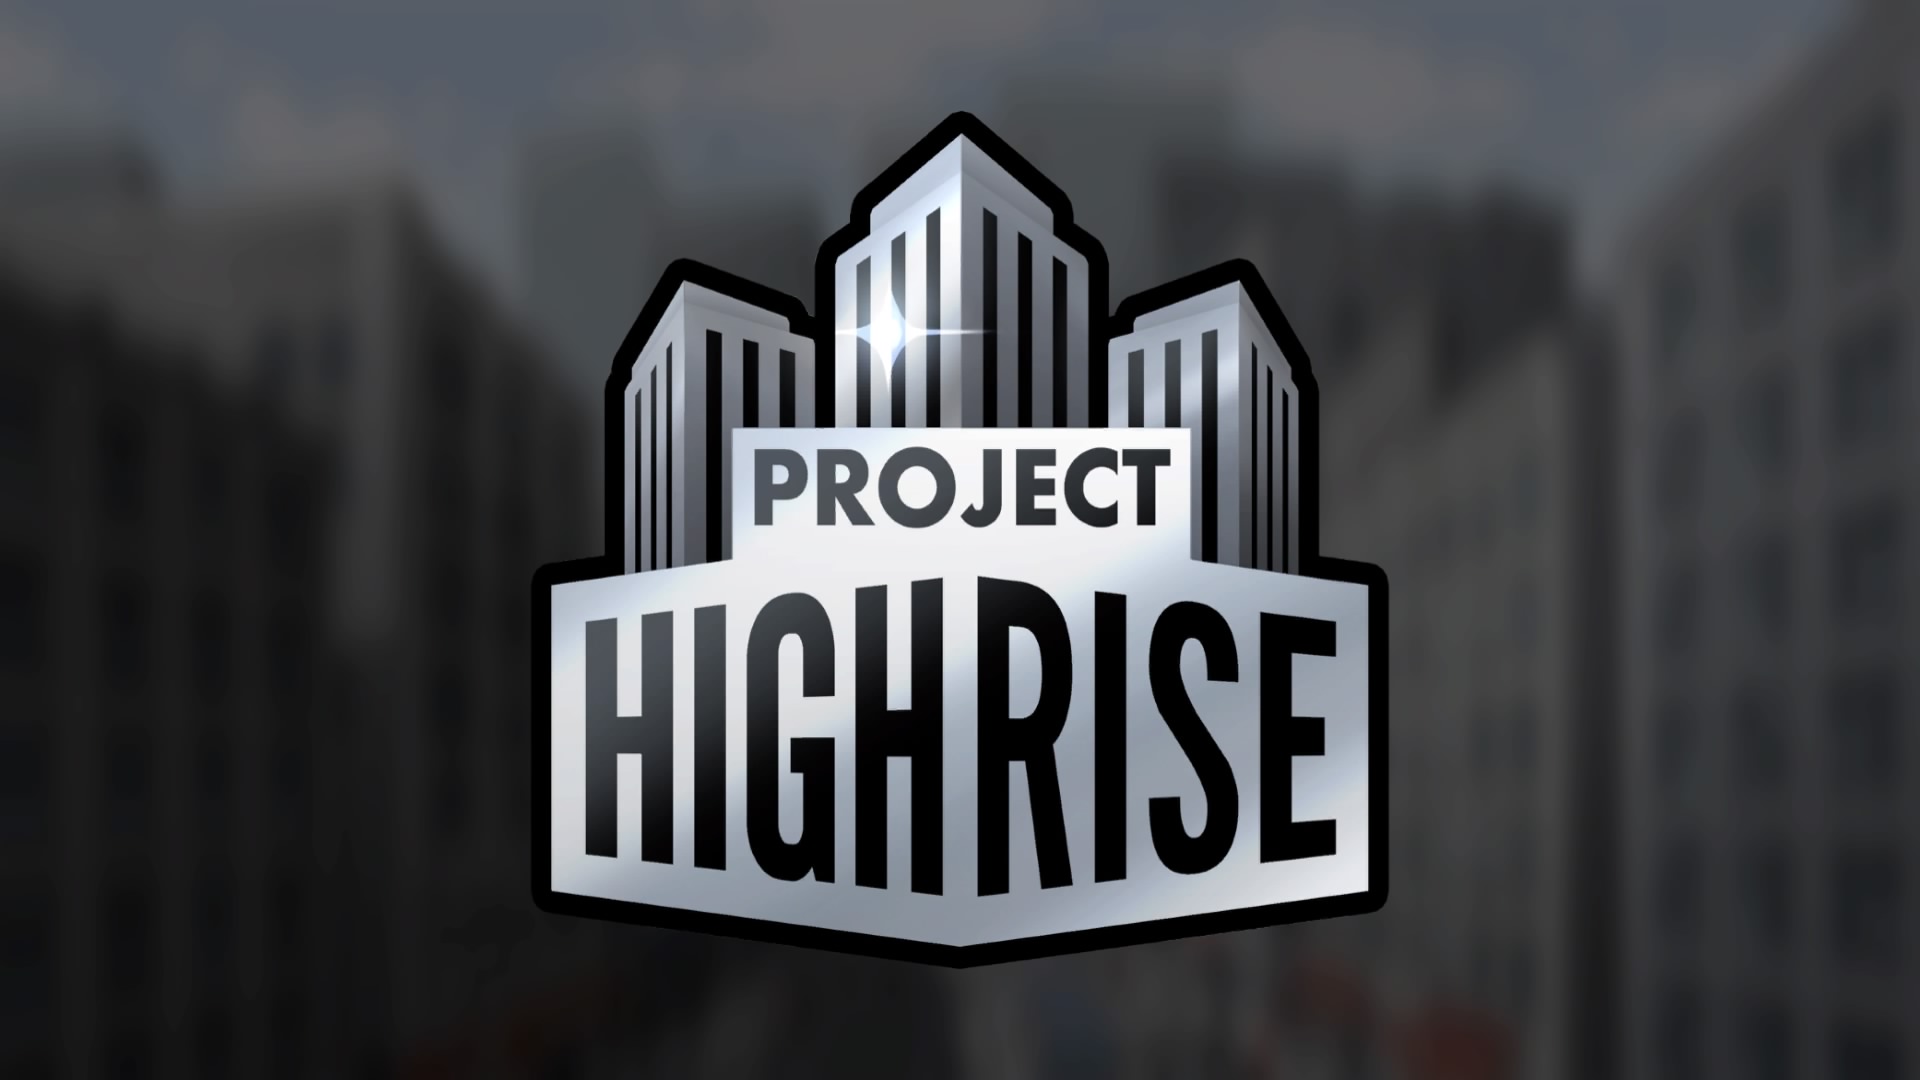 project-highrise-1-.jpg